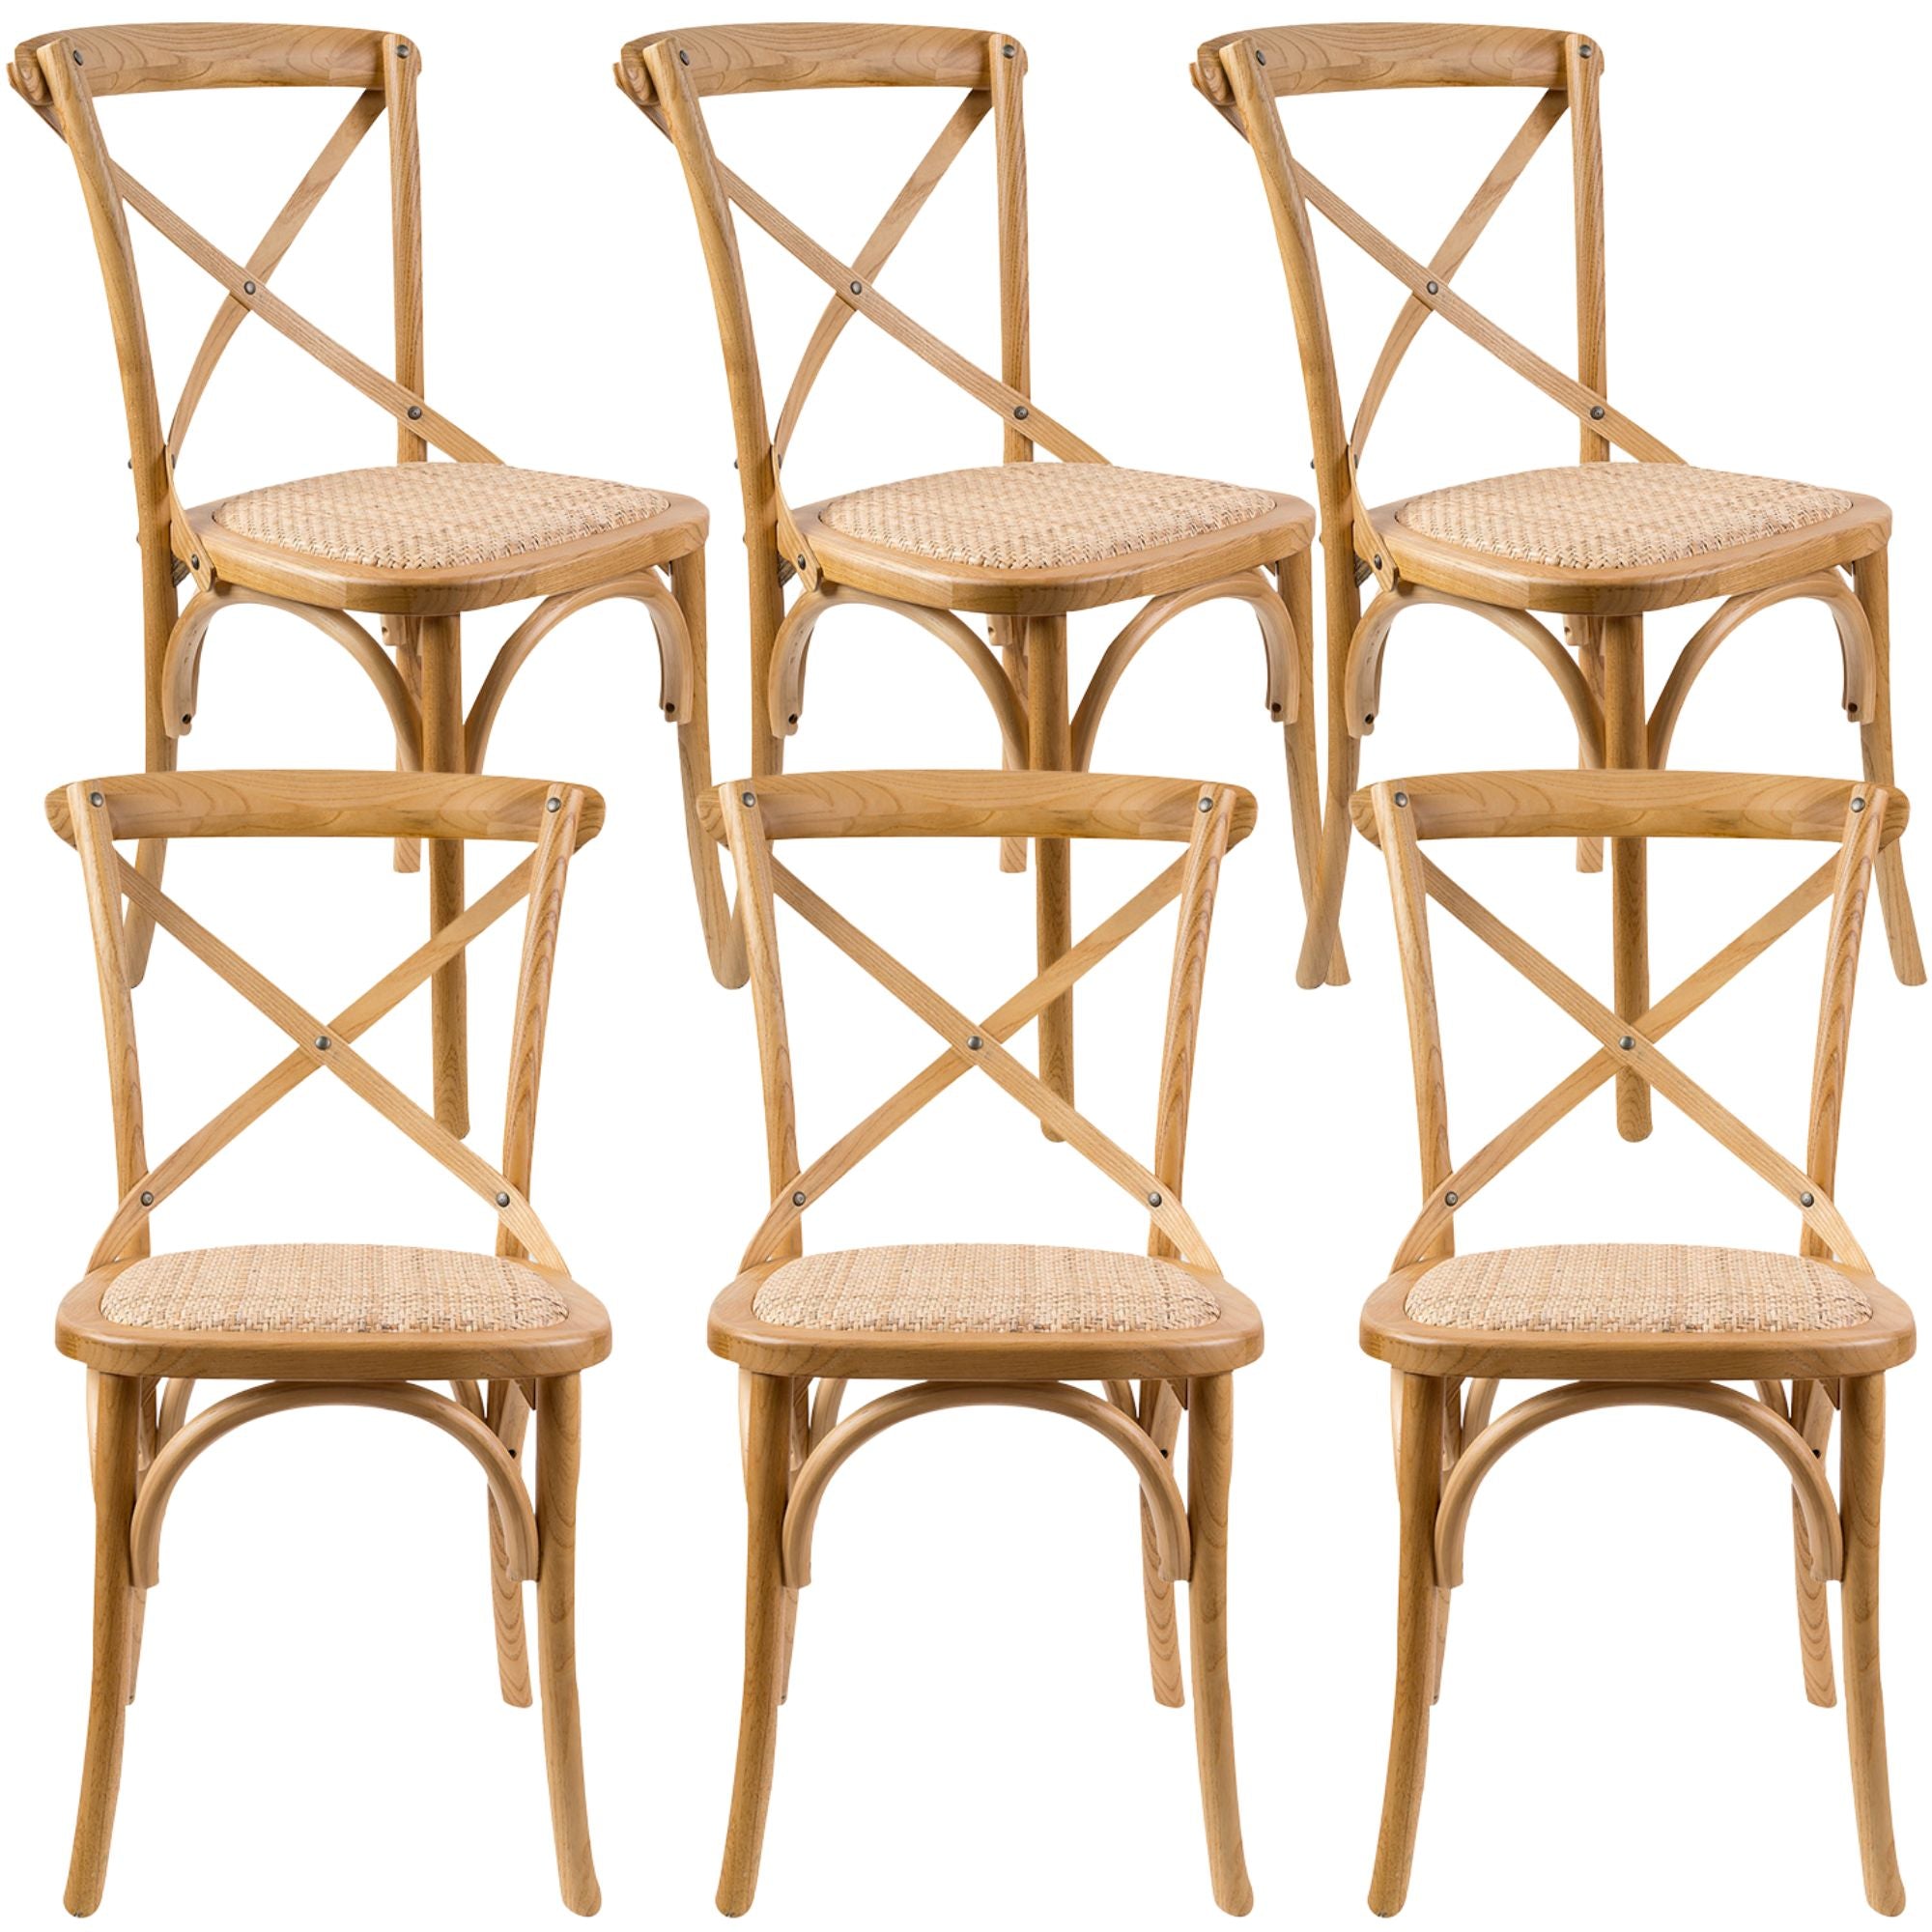 aster-crossback-dining-chair-set-of-6-solid-birch-timber-wood-ratan-seat-oak